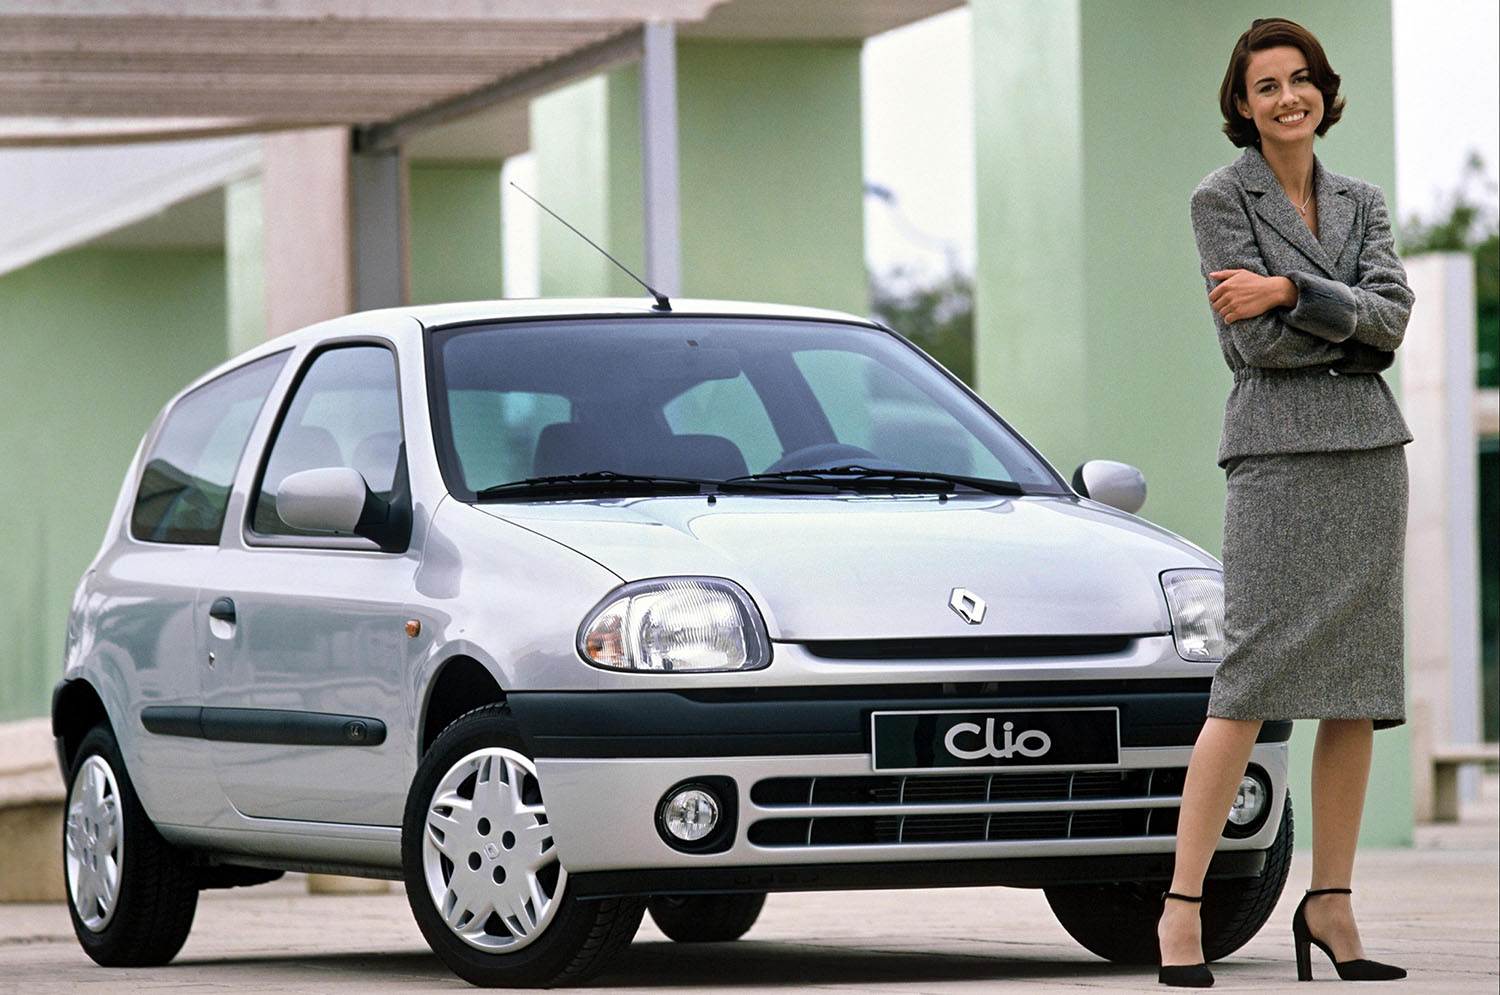 1990s-era Renault Clio Sport in silver with a smiling woman standing in front of it